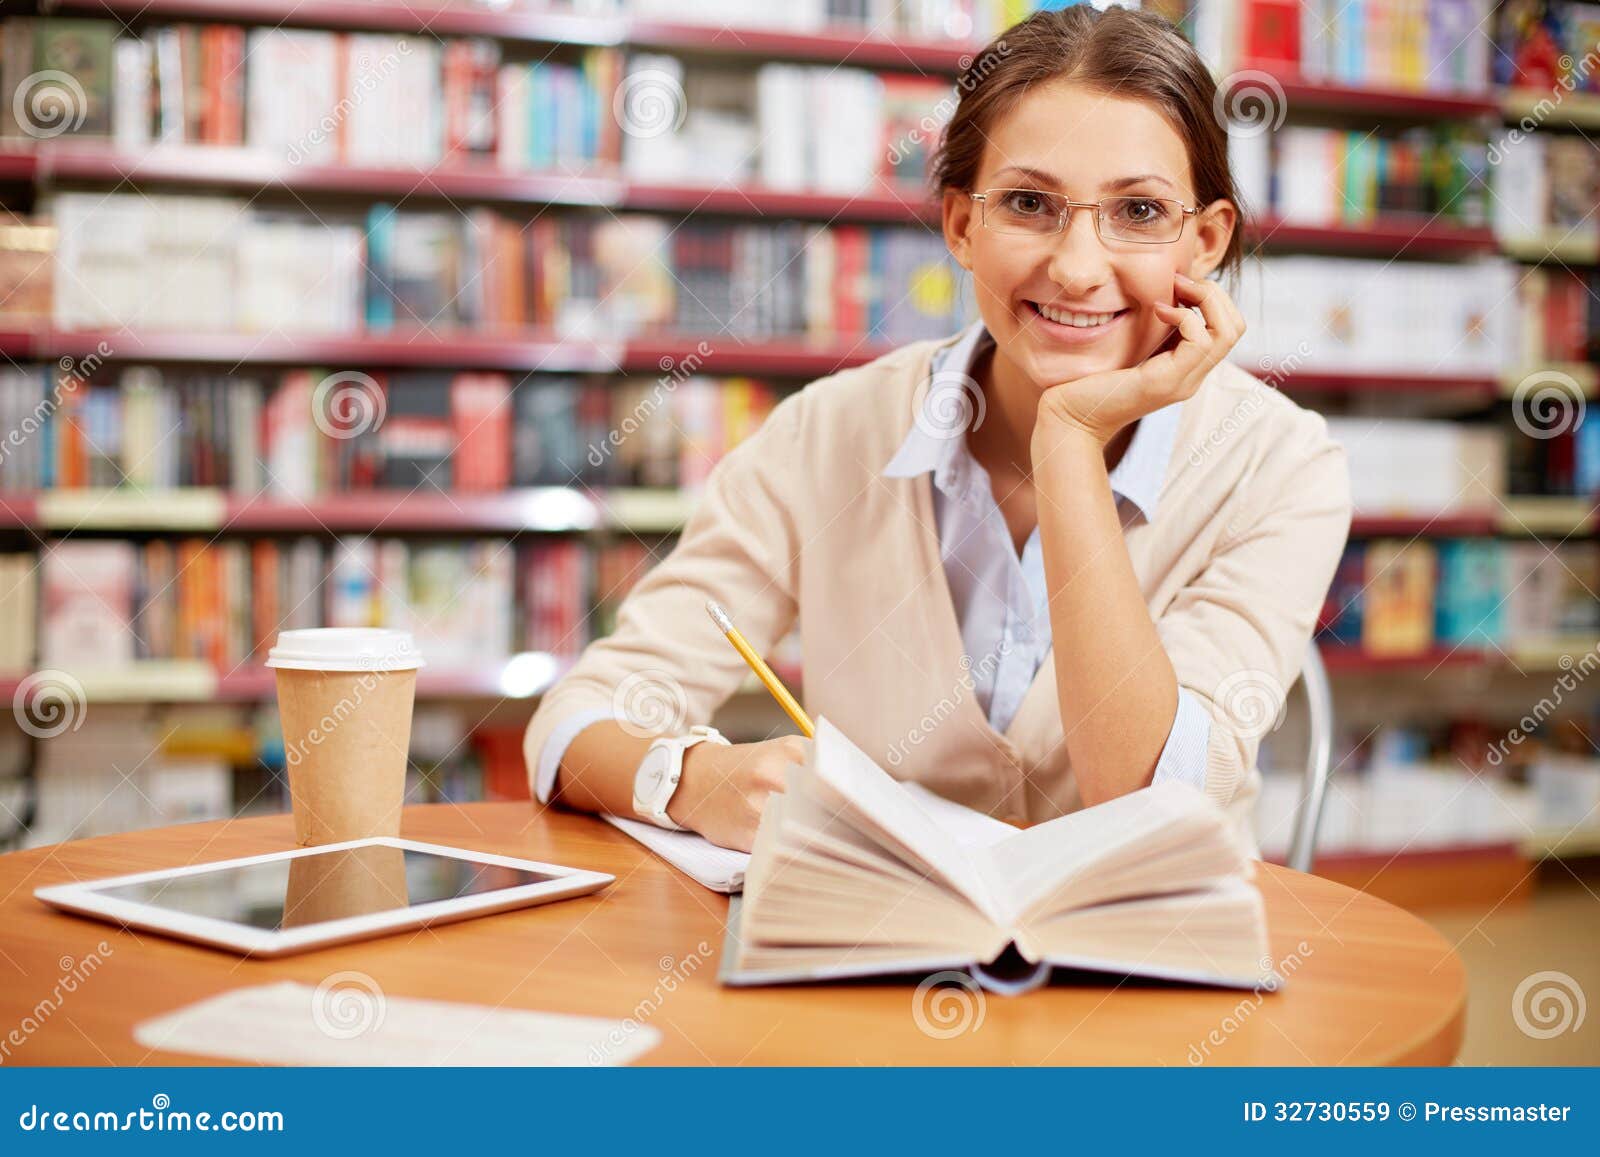 Young Girl In Library Royalty Free Stock Images - Image: 32730559